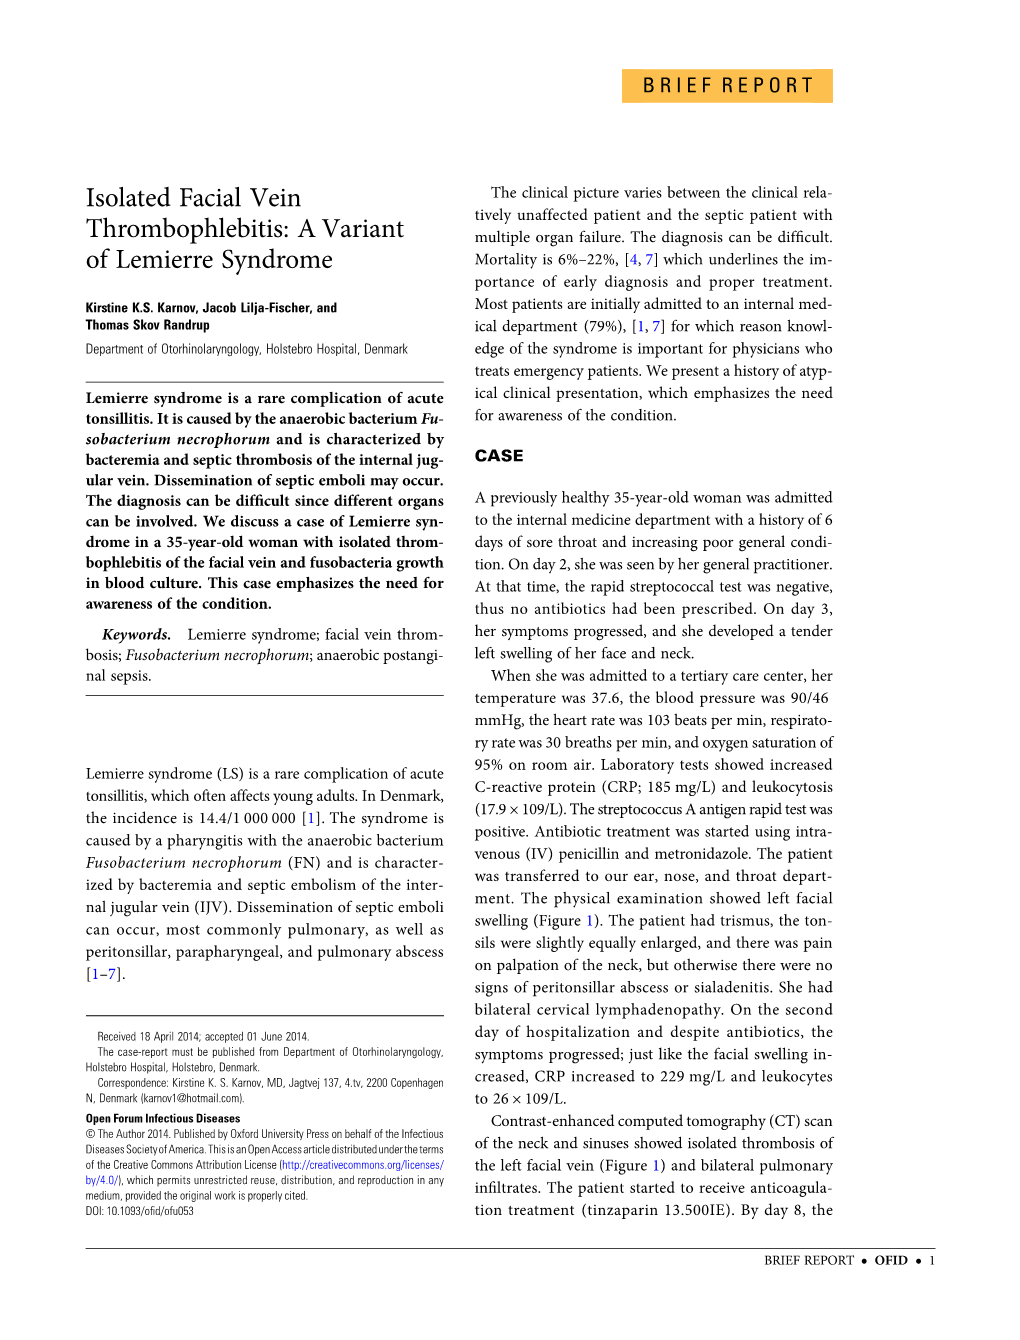 Isolated Facial Vein Thrombophlebitis: a Variant Of